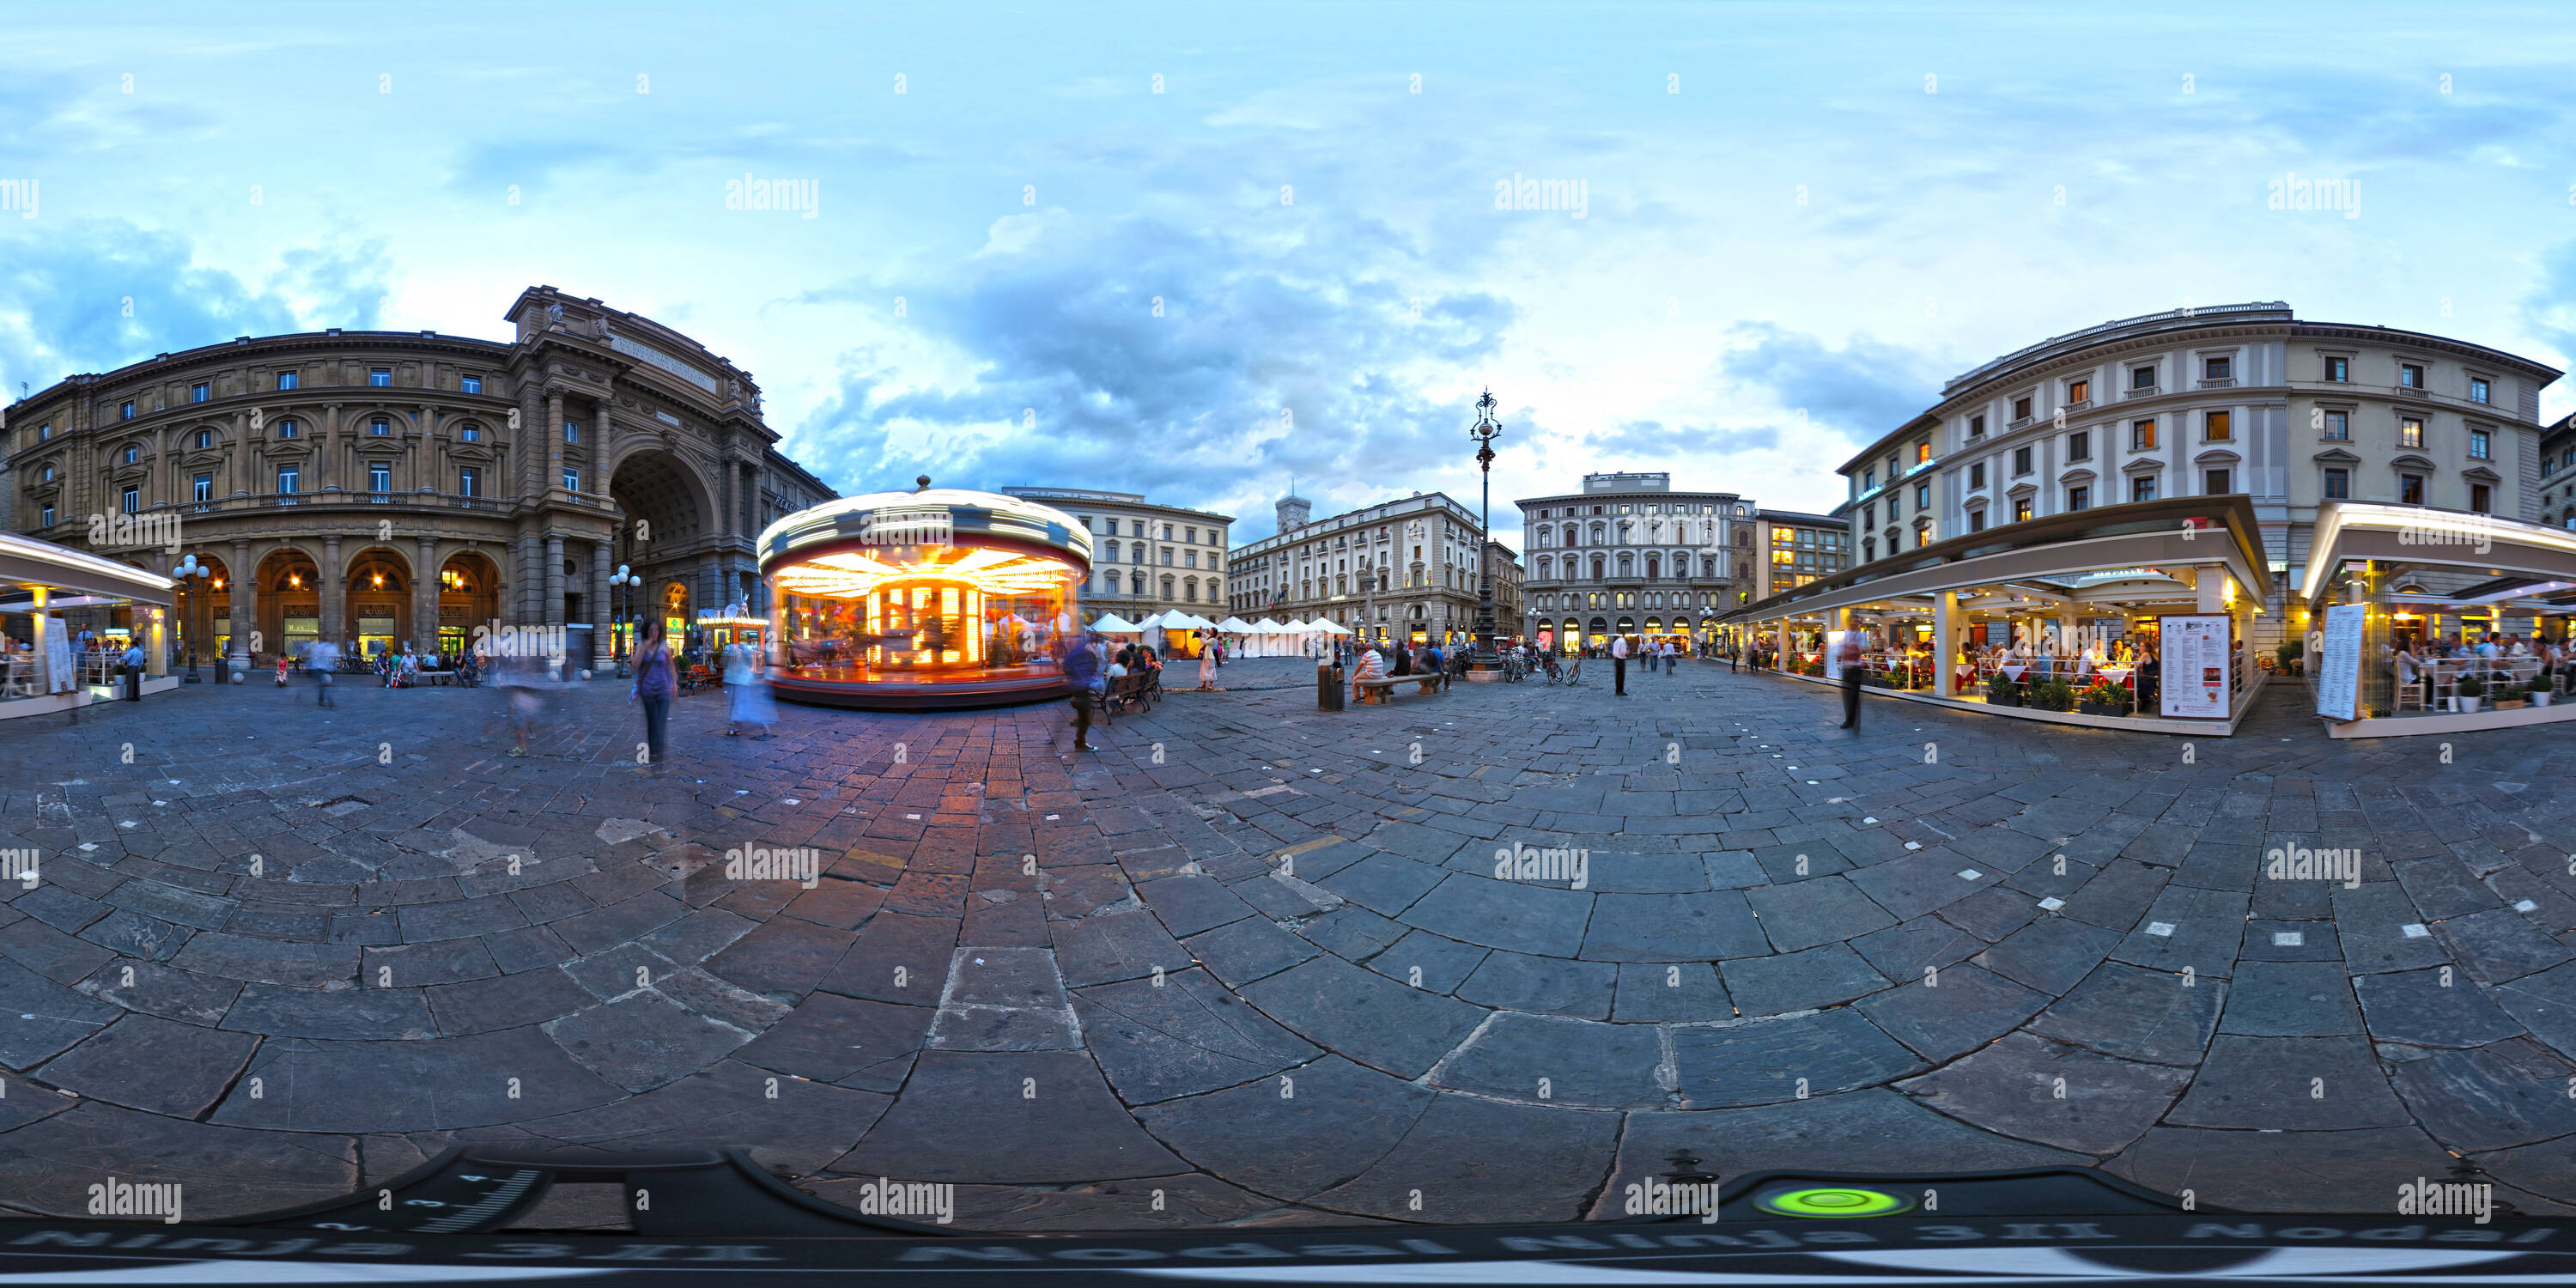 360 degree panoramic view of Piazza della Repubblica at dusk - Florence